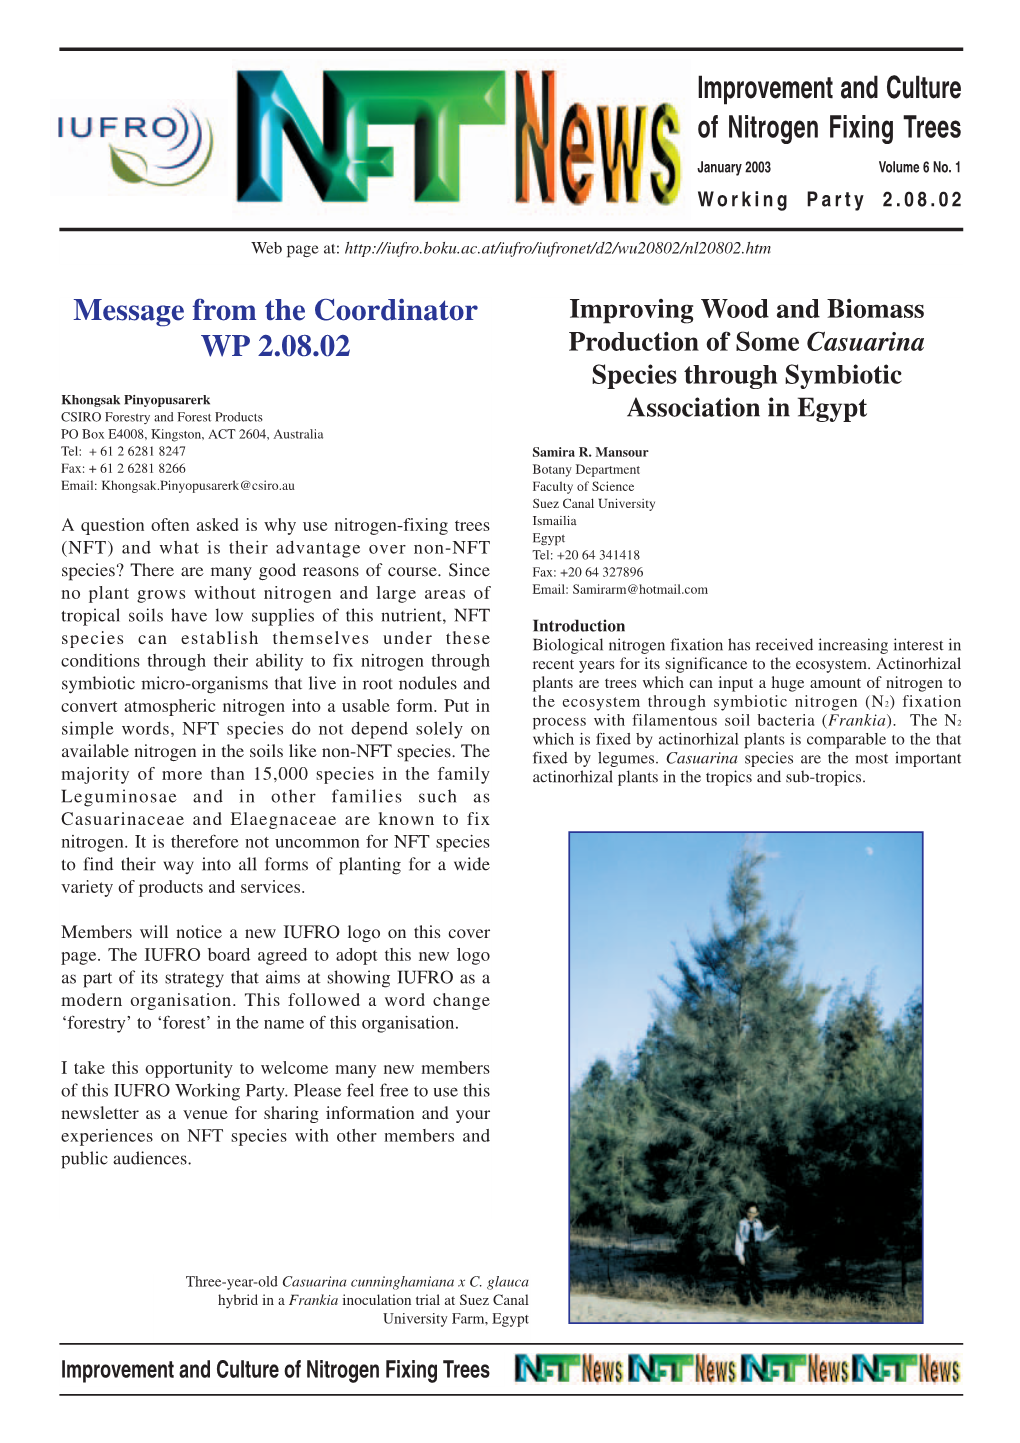 Improvement and Culture of Nitrogen Fixing Trees Message from The